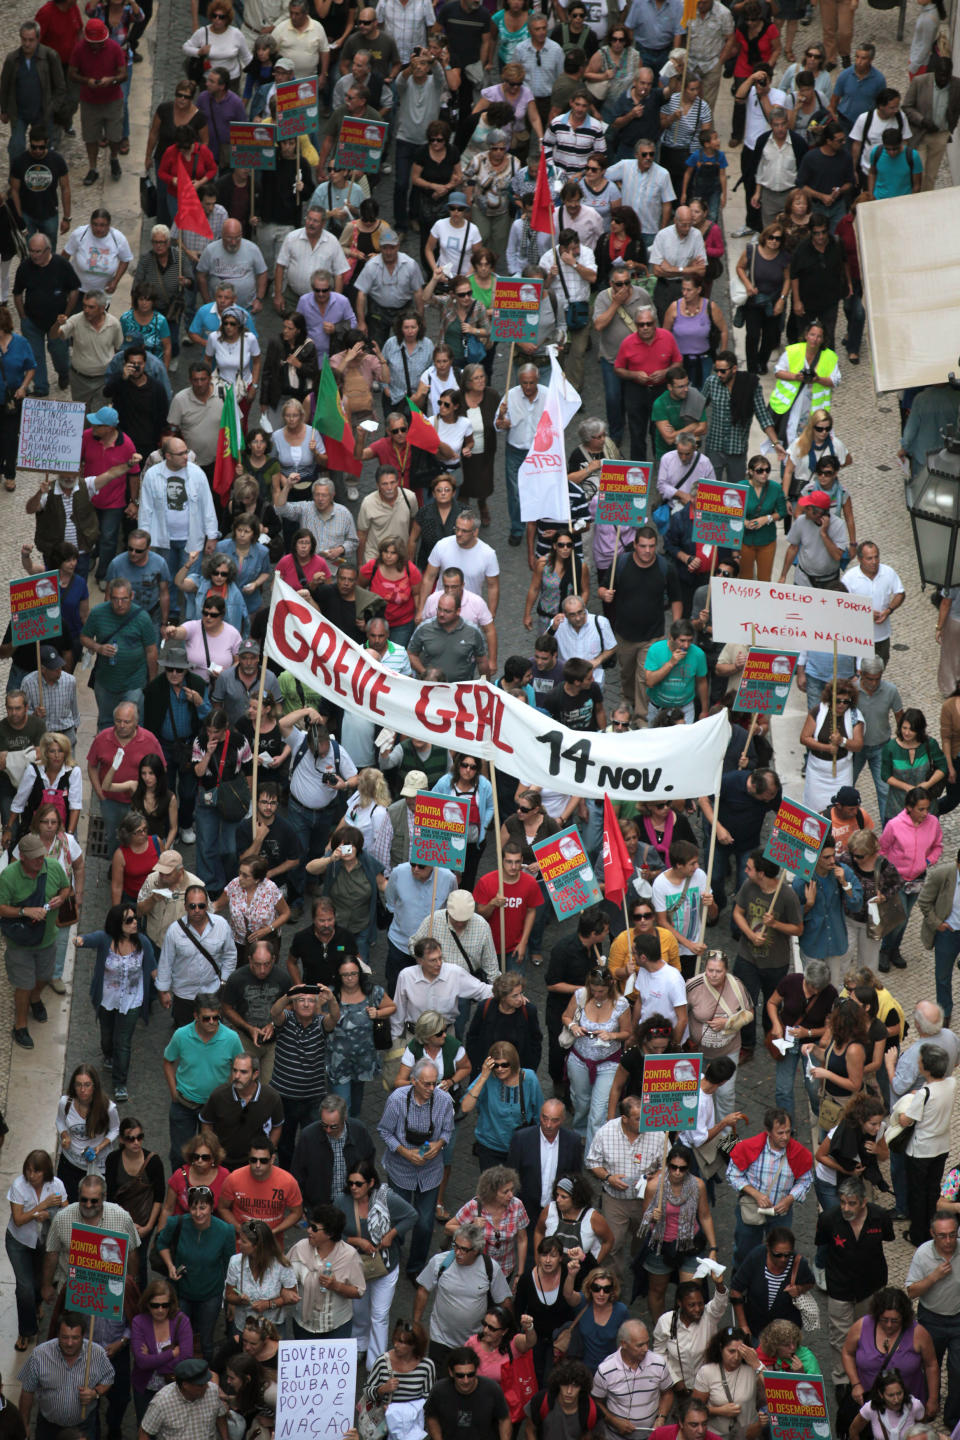 A banner calling for a general strike on November 14 is carried by demonstrators during a protest march against austerity measures as they head to the Portuguese parliament in Lisbon Saturday, Oct. 13 2012. Unemployment figures in Portugal have soared since the introduction of austerity measures to fight the country's debt crisis. (AP Photo/Armando Franca)